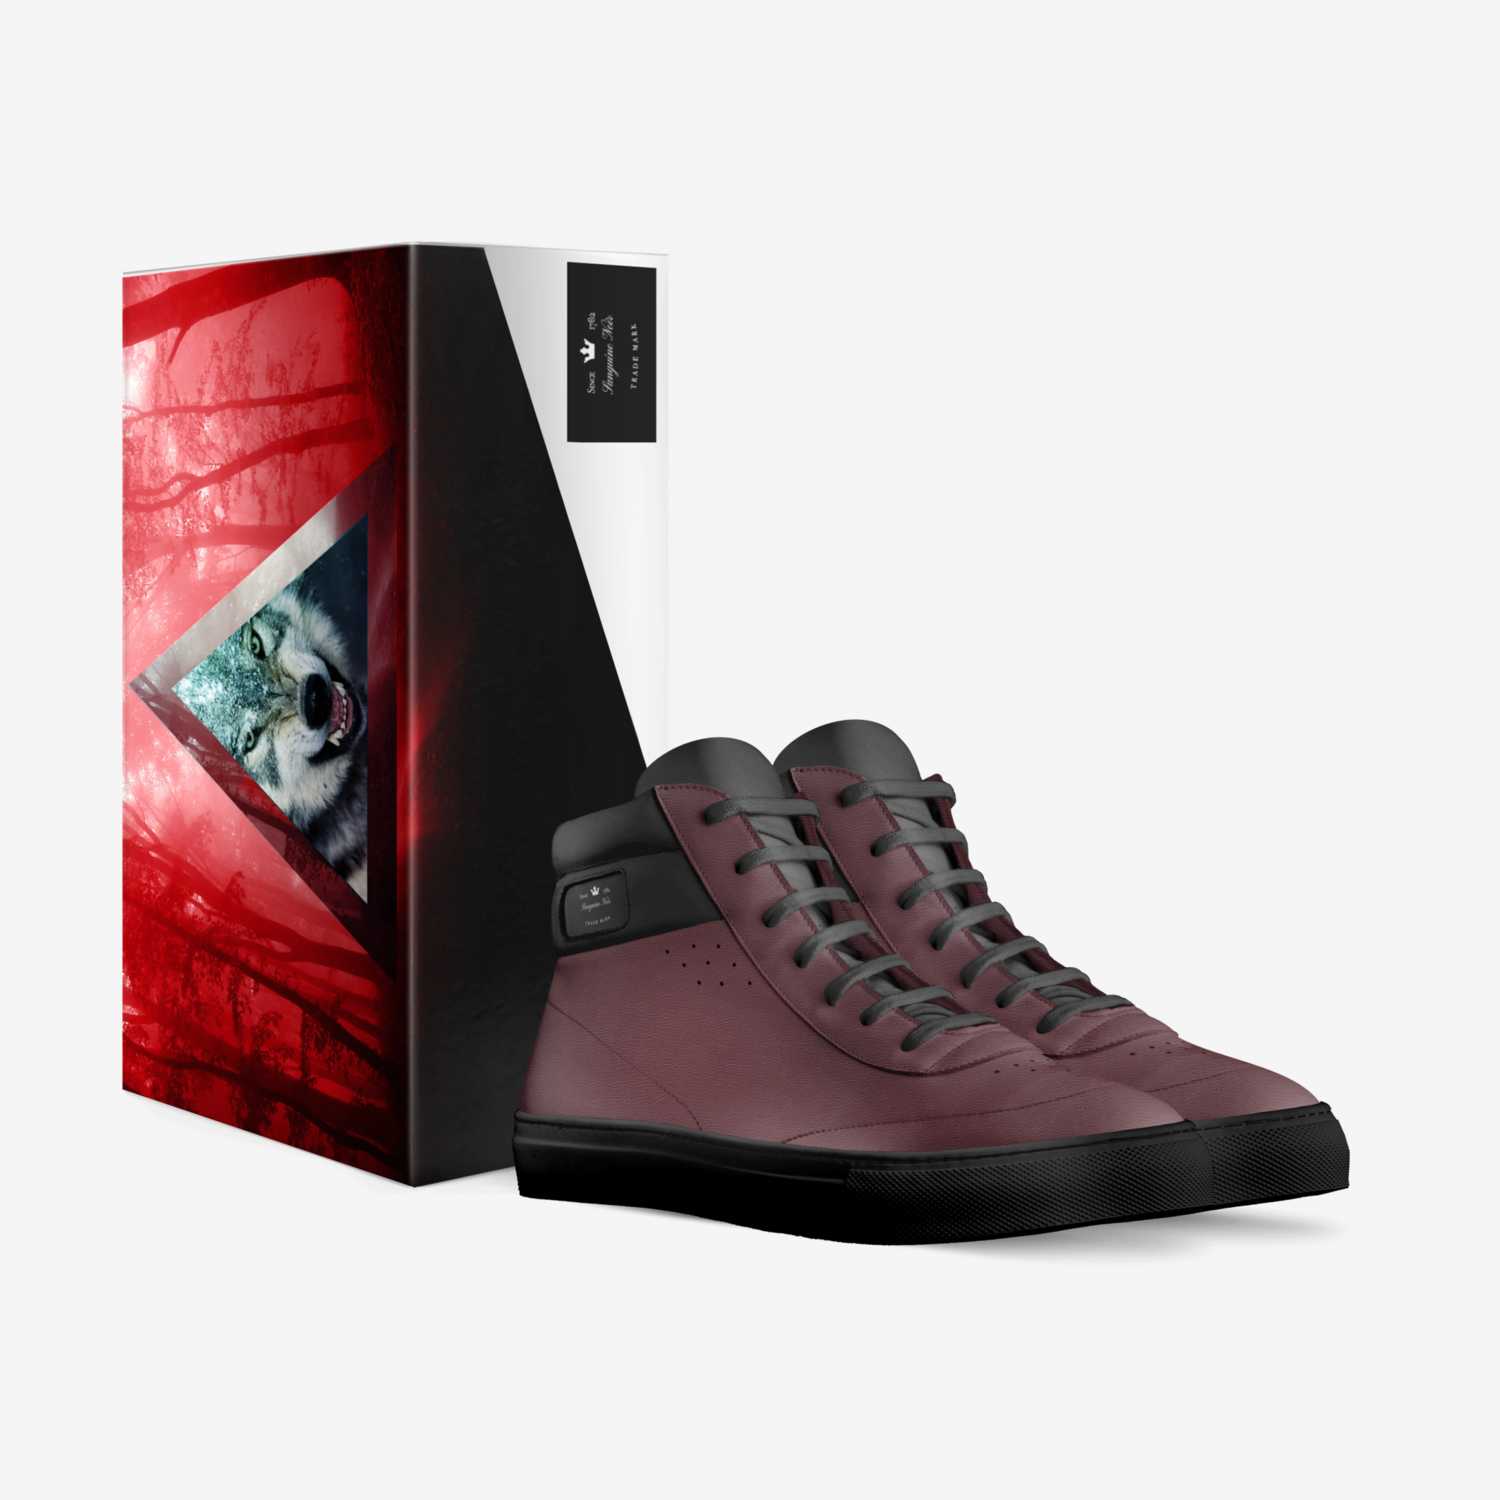 Sanguine Noir custom made in Italy shoes by Steve Salinas | Box view